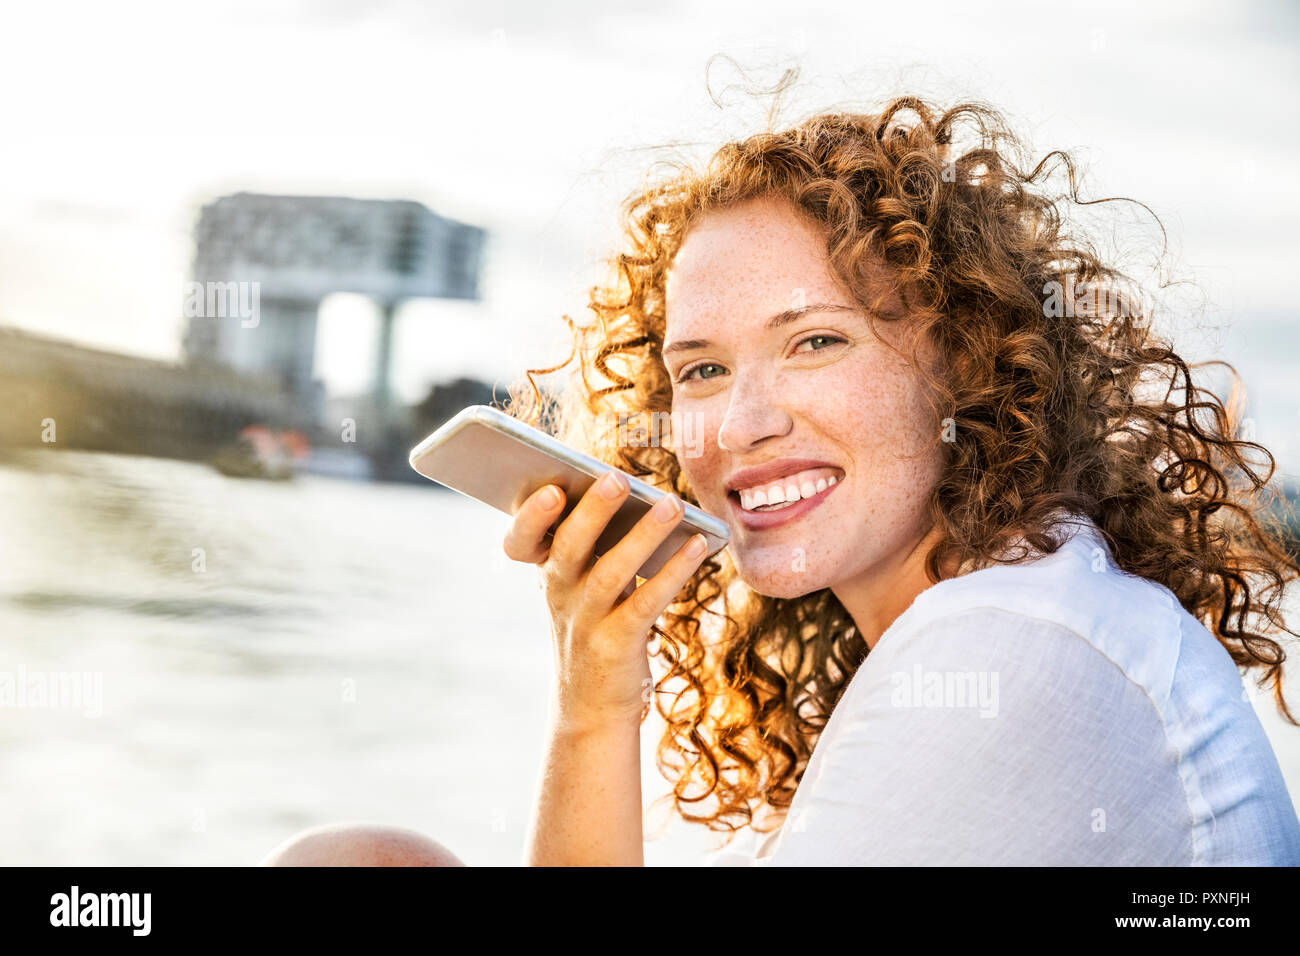 Germany, Cologne, portrait of happy  young woman on the phone sitting at riverside in the evening Stock Photo